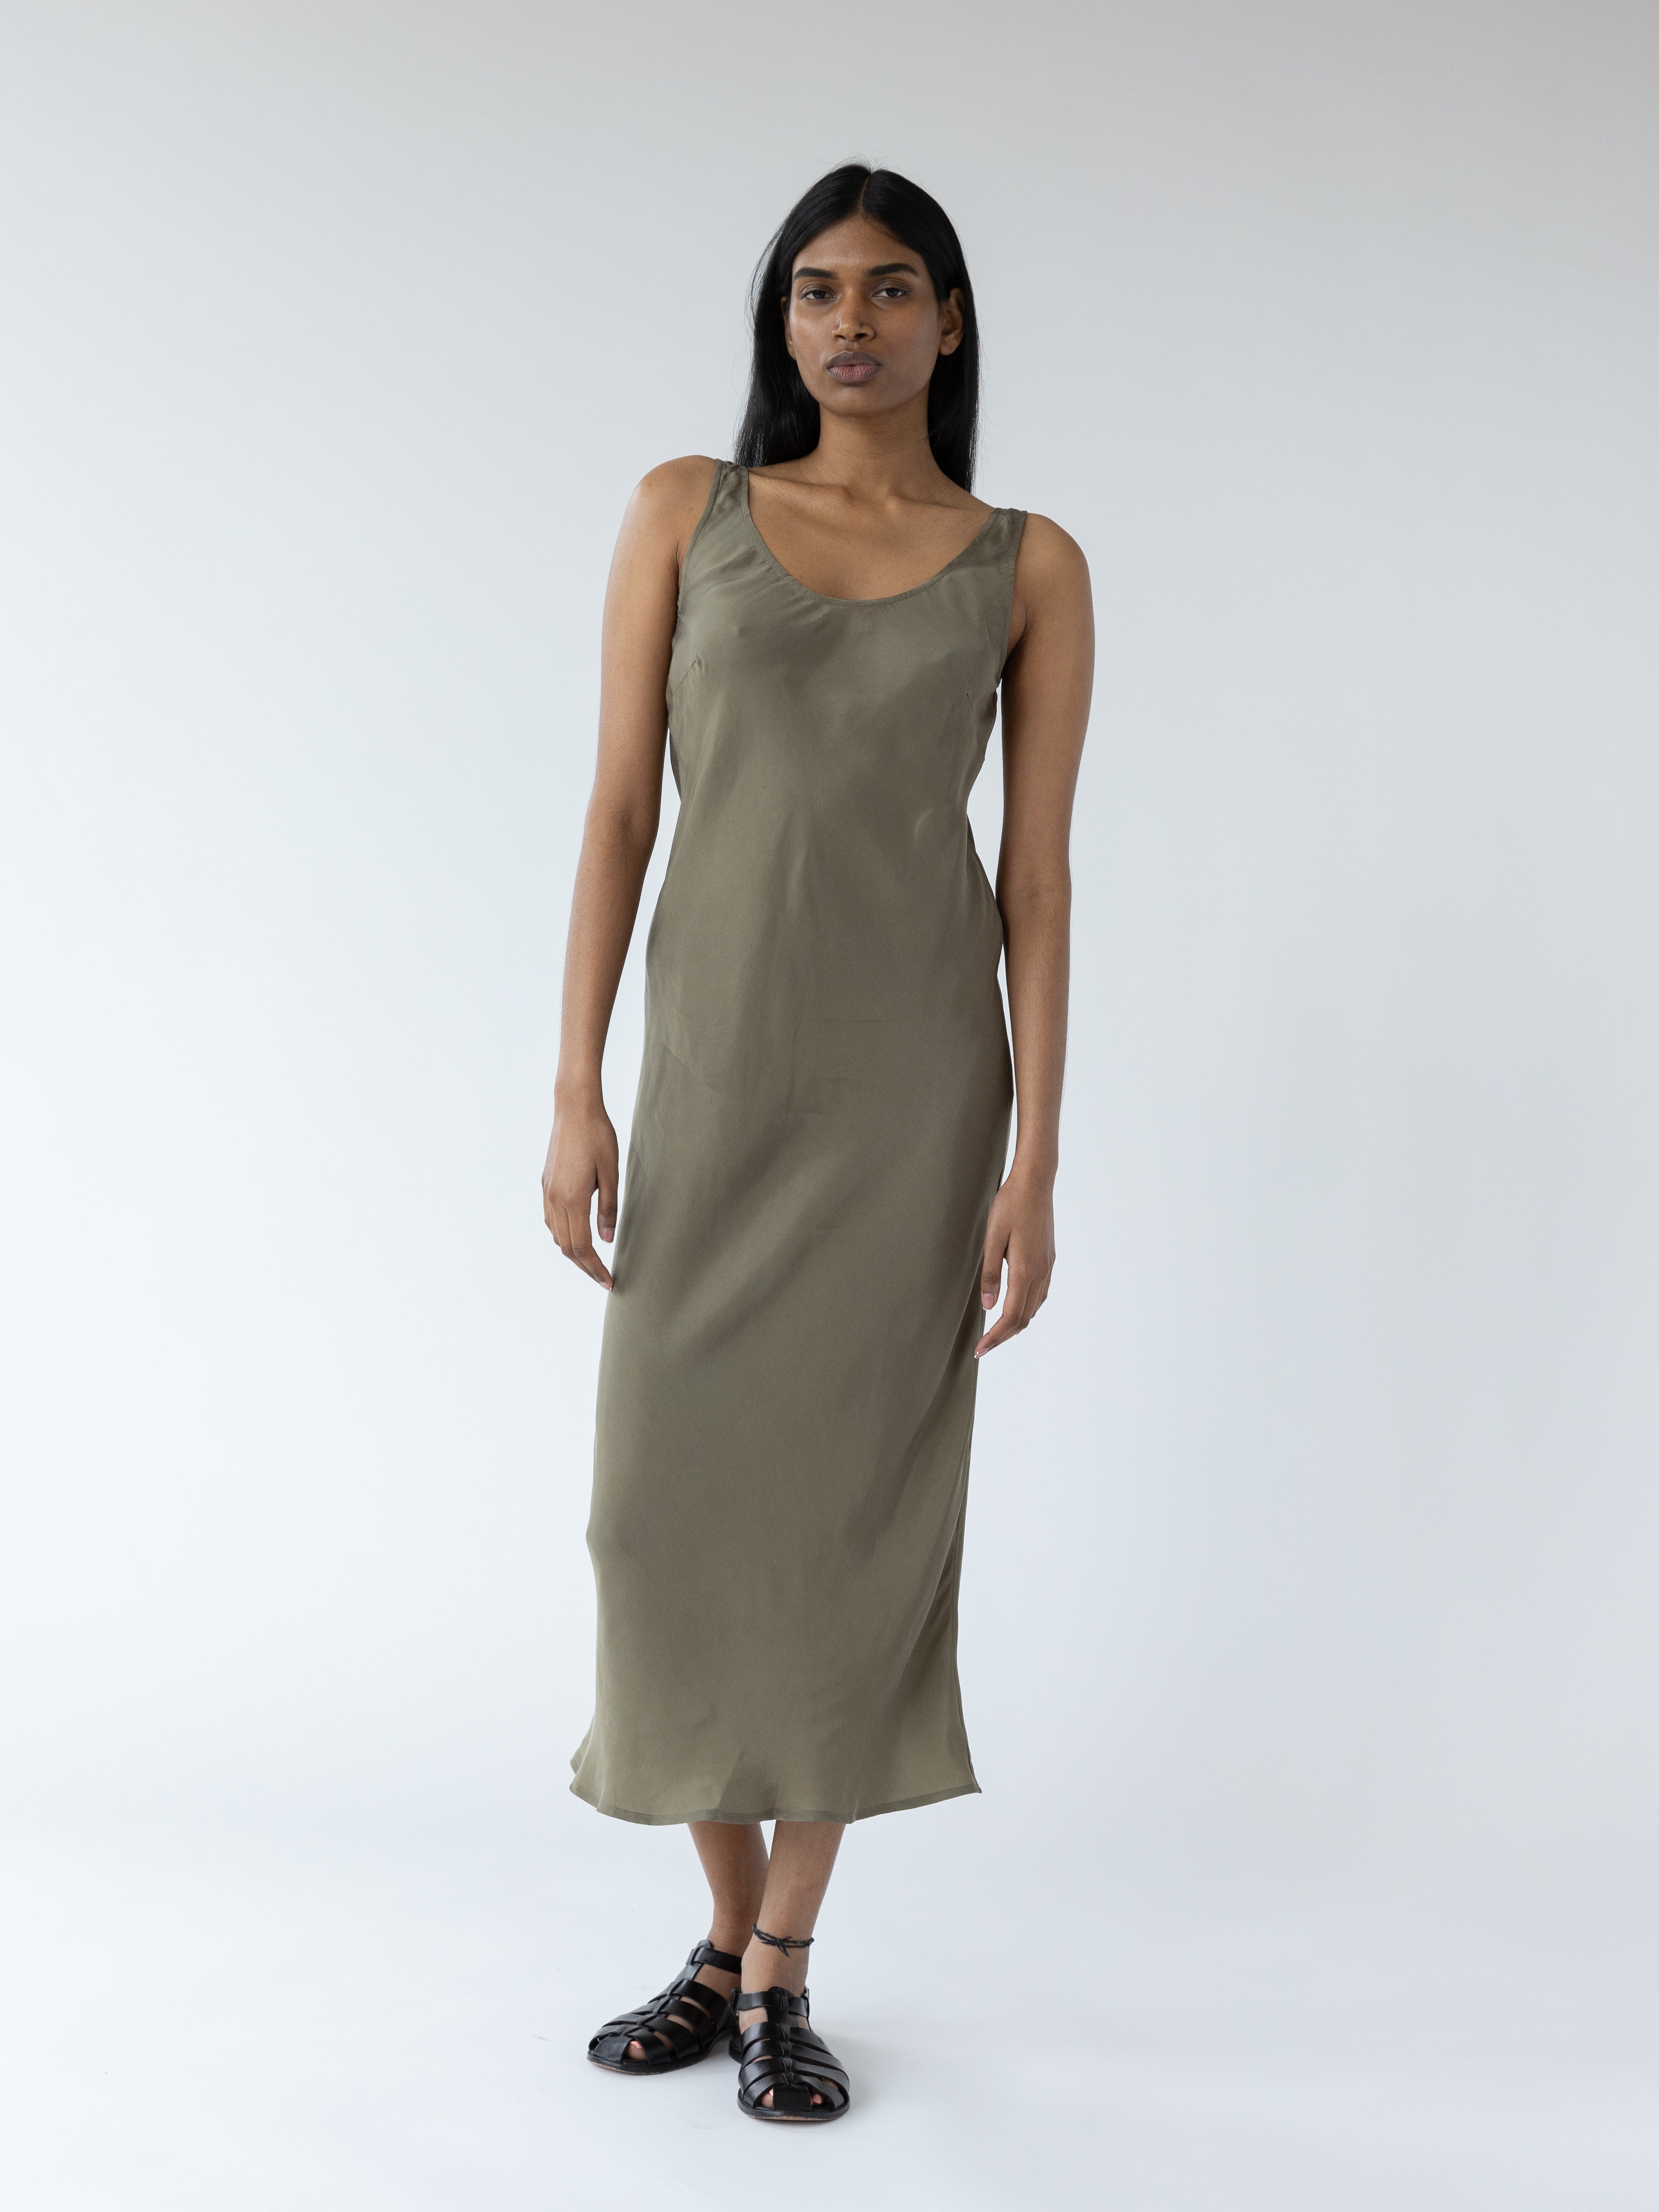 Thumbnail image of Murano Dress in Olive